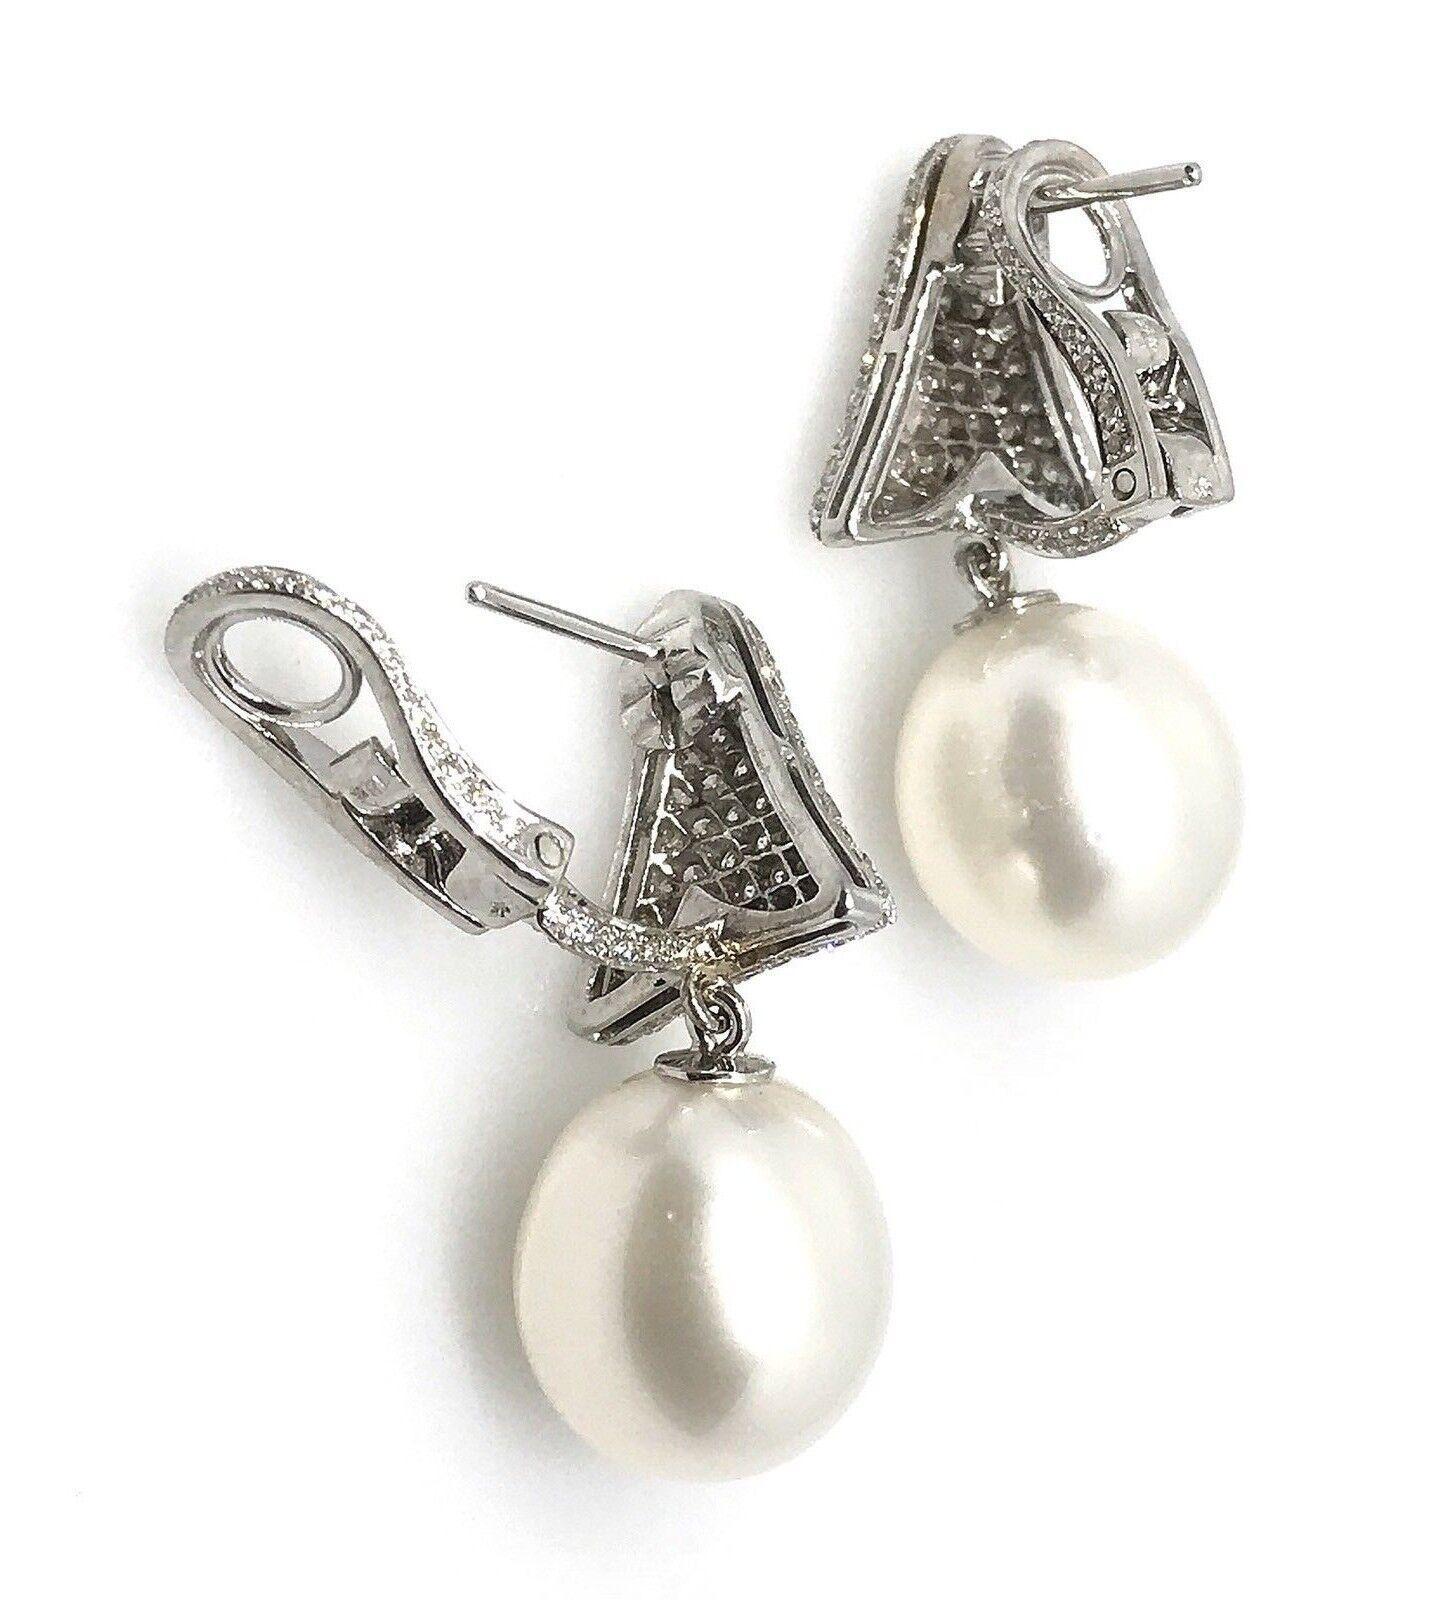 South Sea Pearl and Pave Diamond Drop Earrings in 18k White Gold In Excellent Condition For Sale In La Jolla, CA